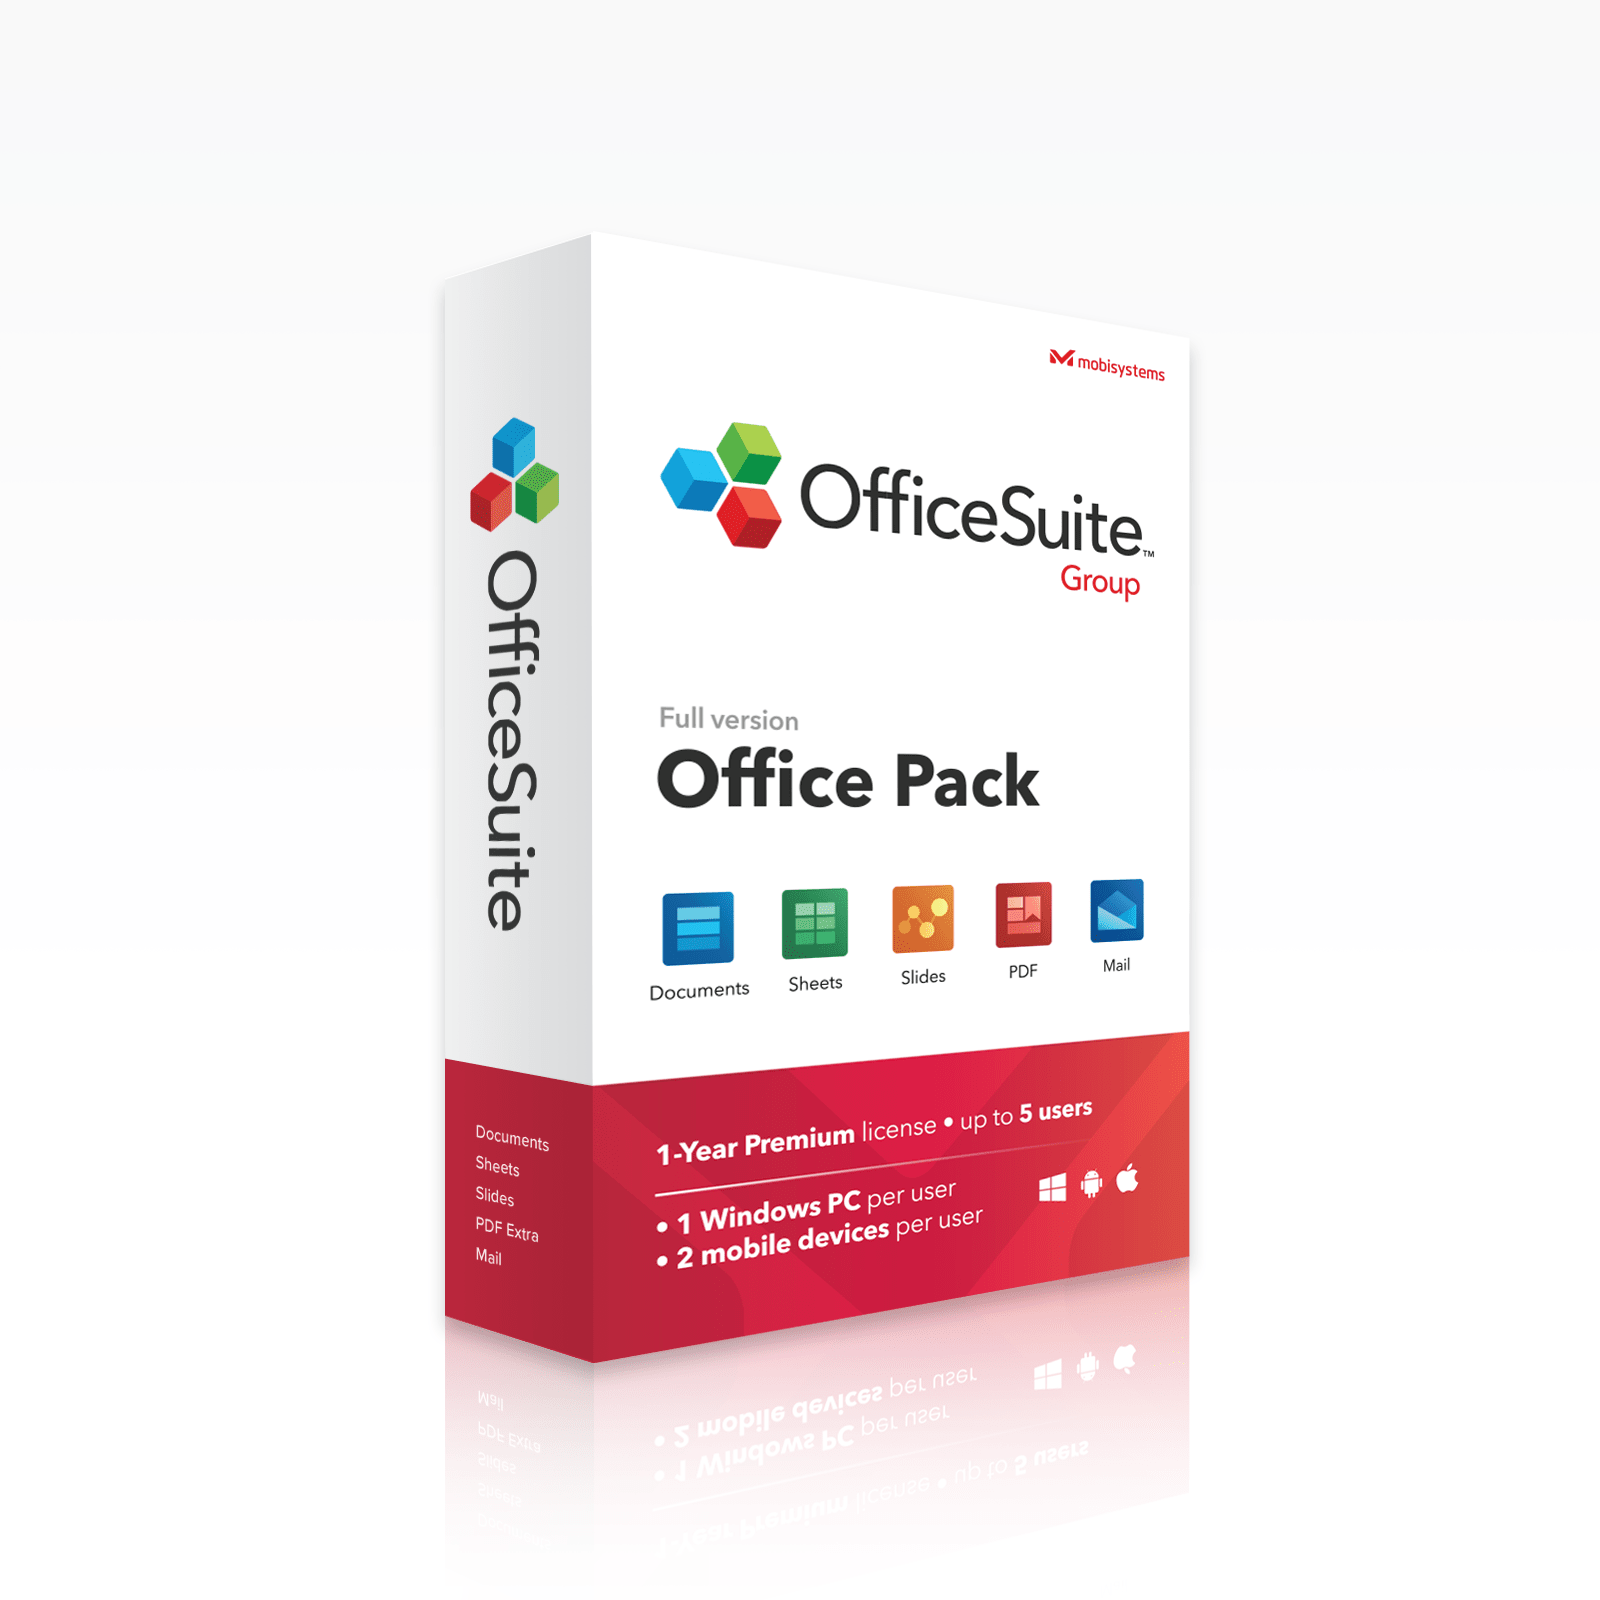 Switch seamlessly between devices. Use OfficeSuite for iOS or Android